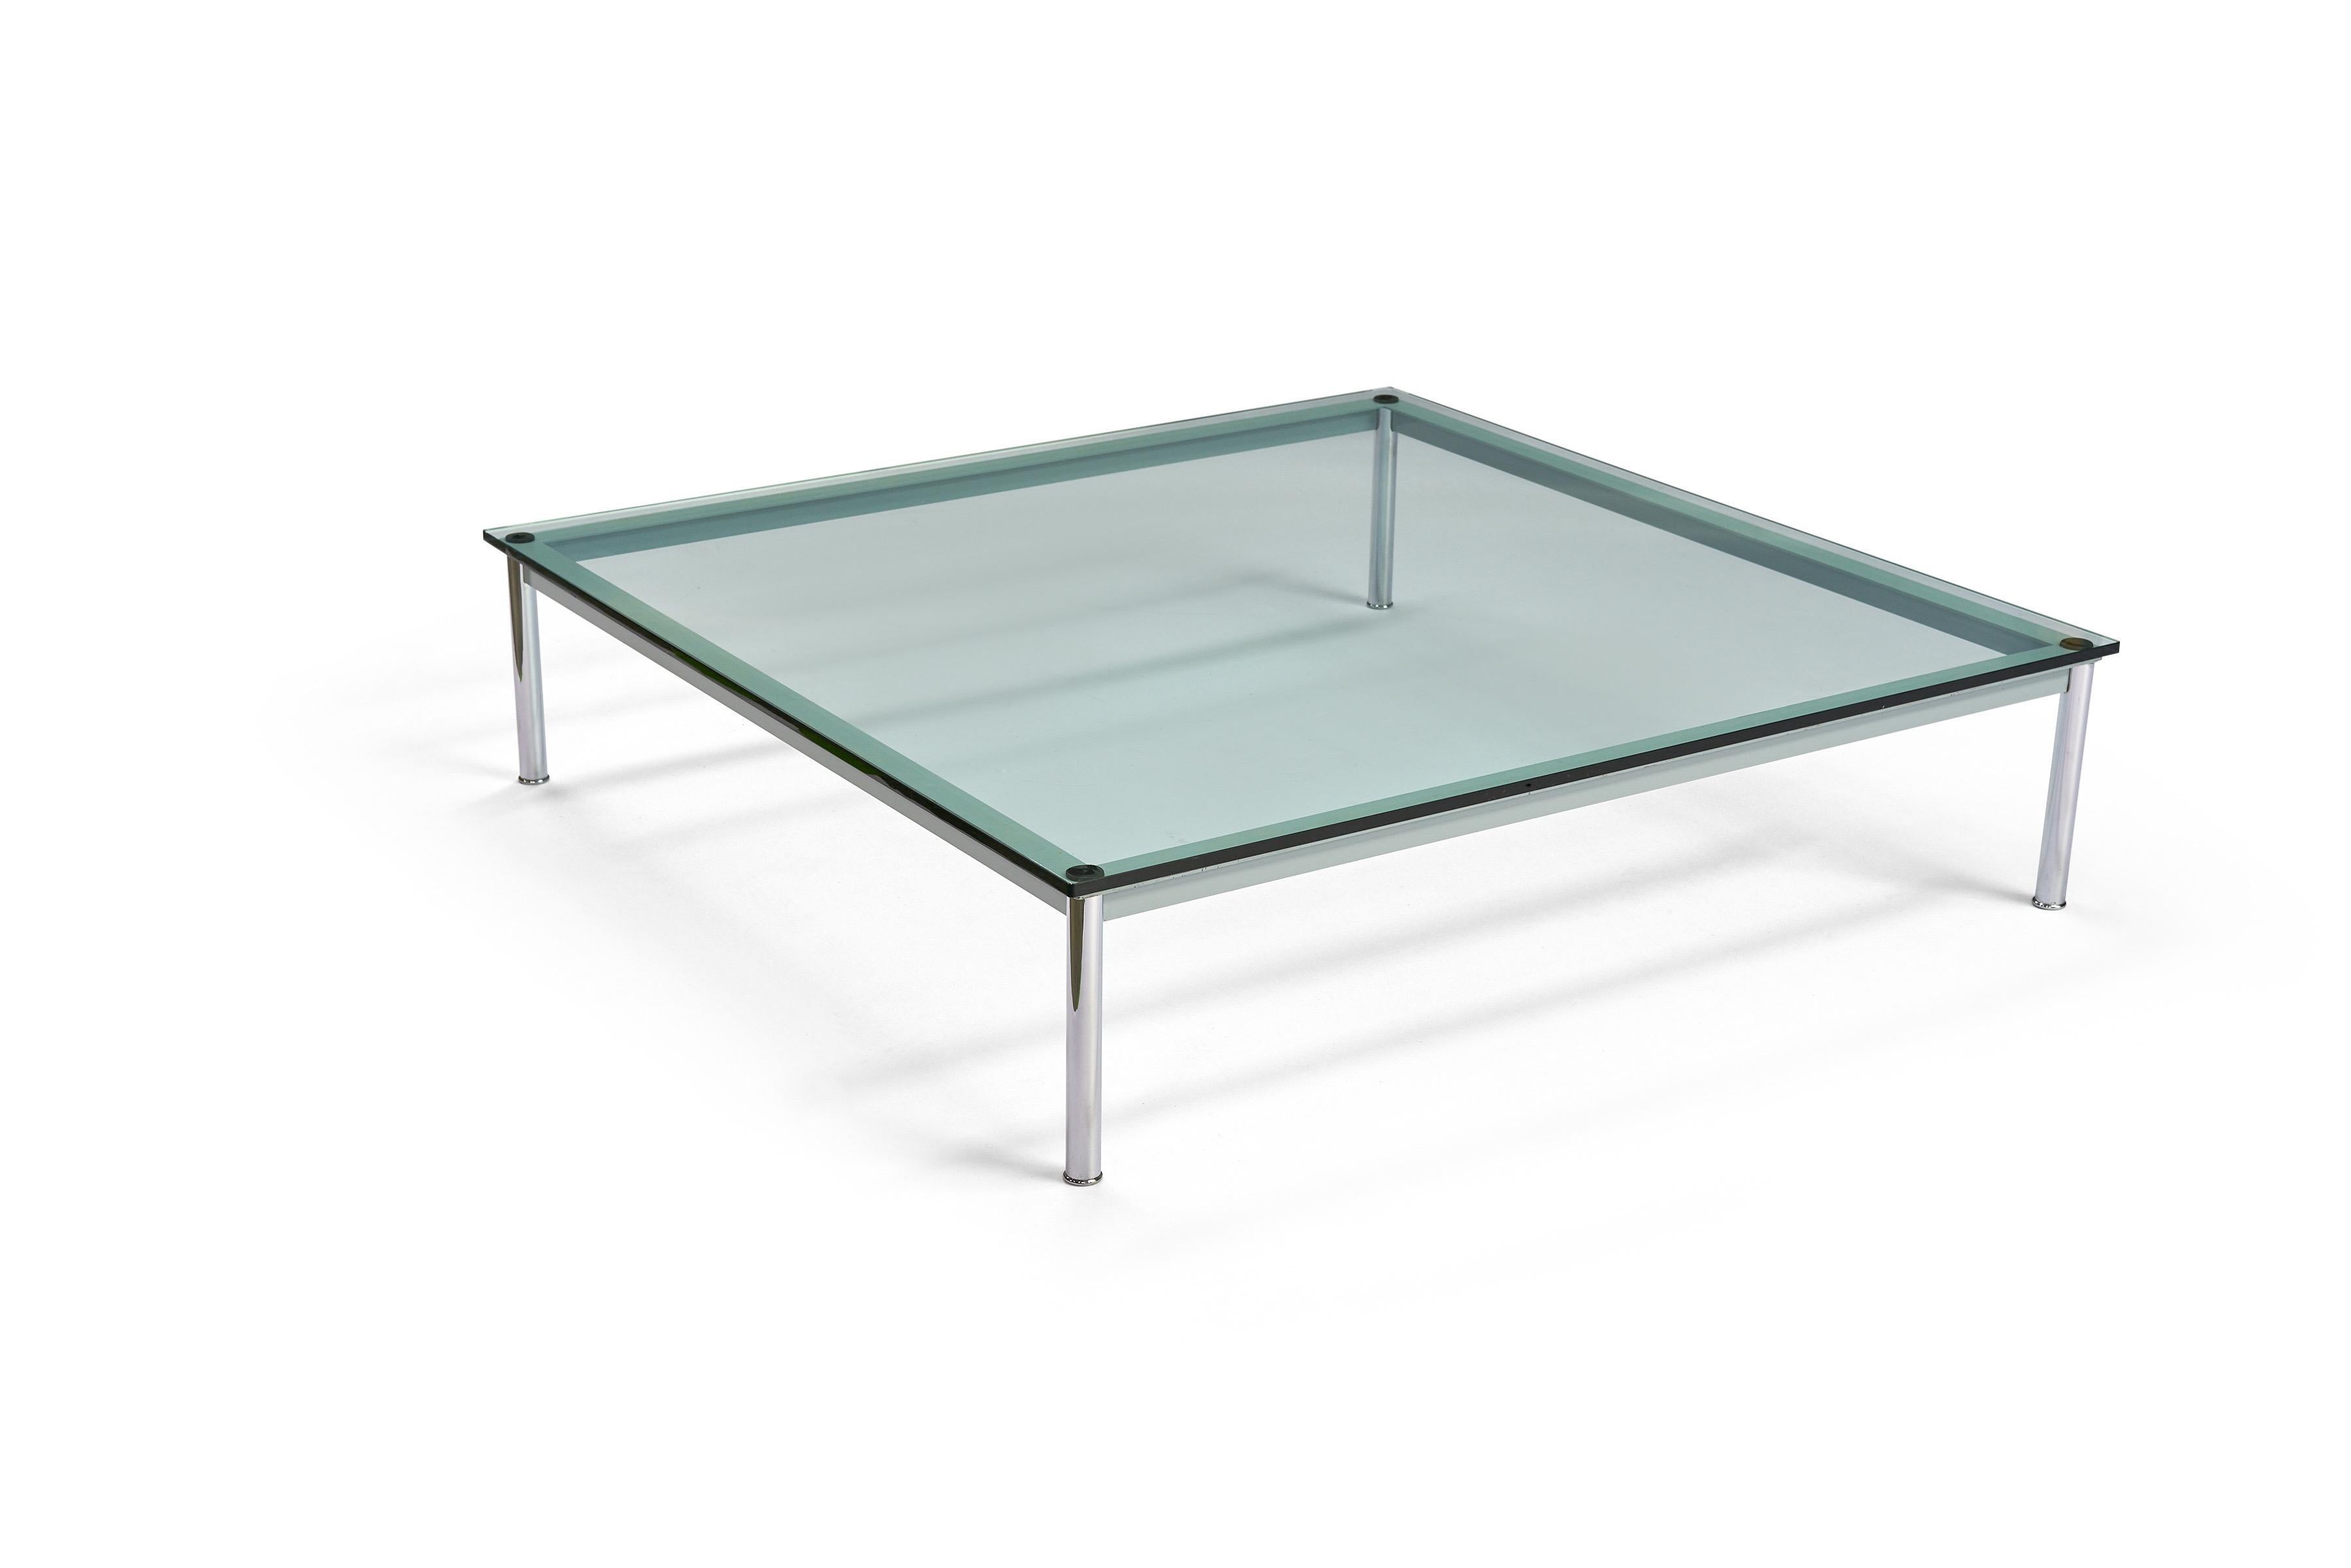 Le Corbusier lc10-p low table for Cassina

Large glass top coffee table with chrome steel legs and painted frame

Square shape

Measures: 55” W x 55” D x 13” H

Original condition with small scratches to glass.
   